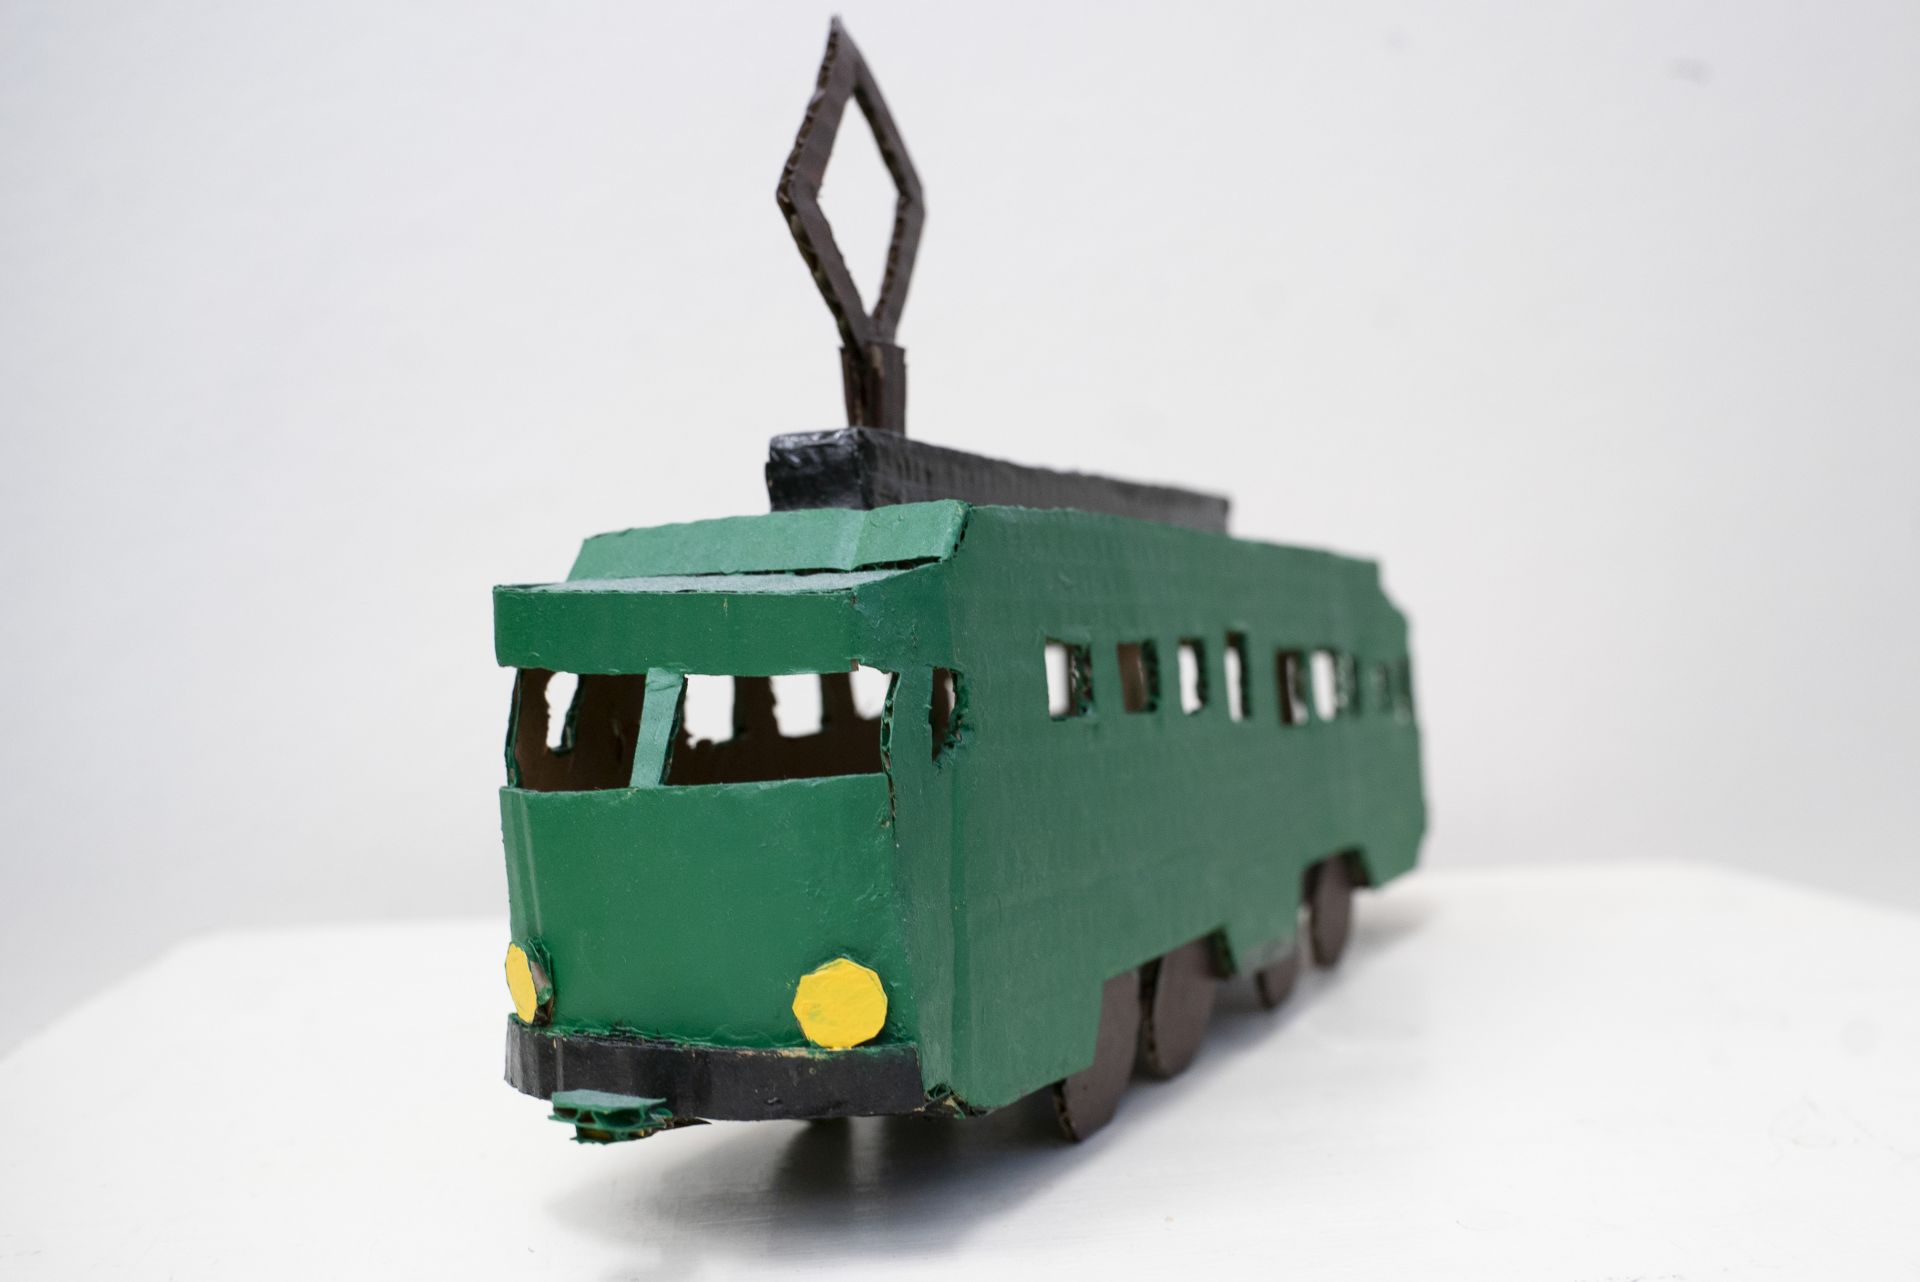 Cardboard miniature of an old tram from Helsinki. The tram is painted dark green with black and yellow details. 